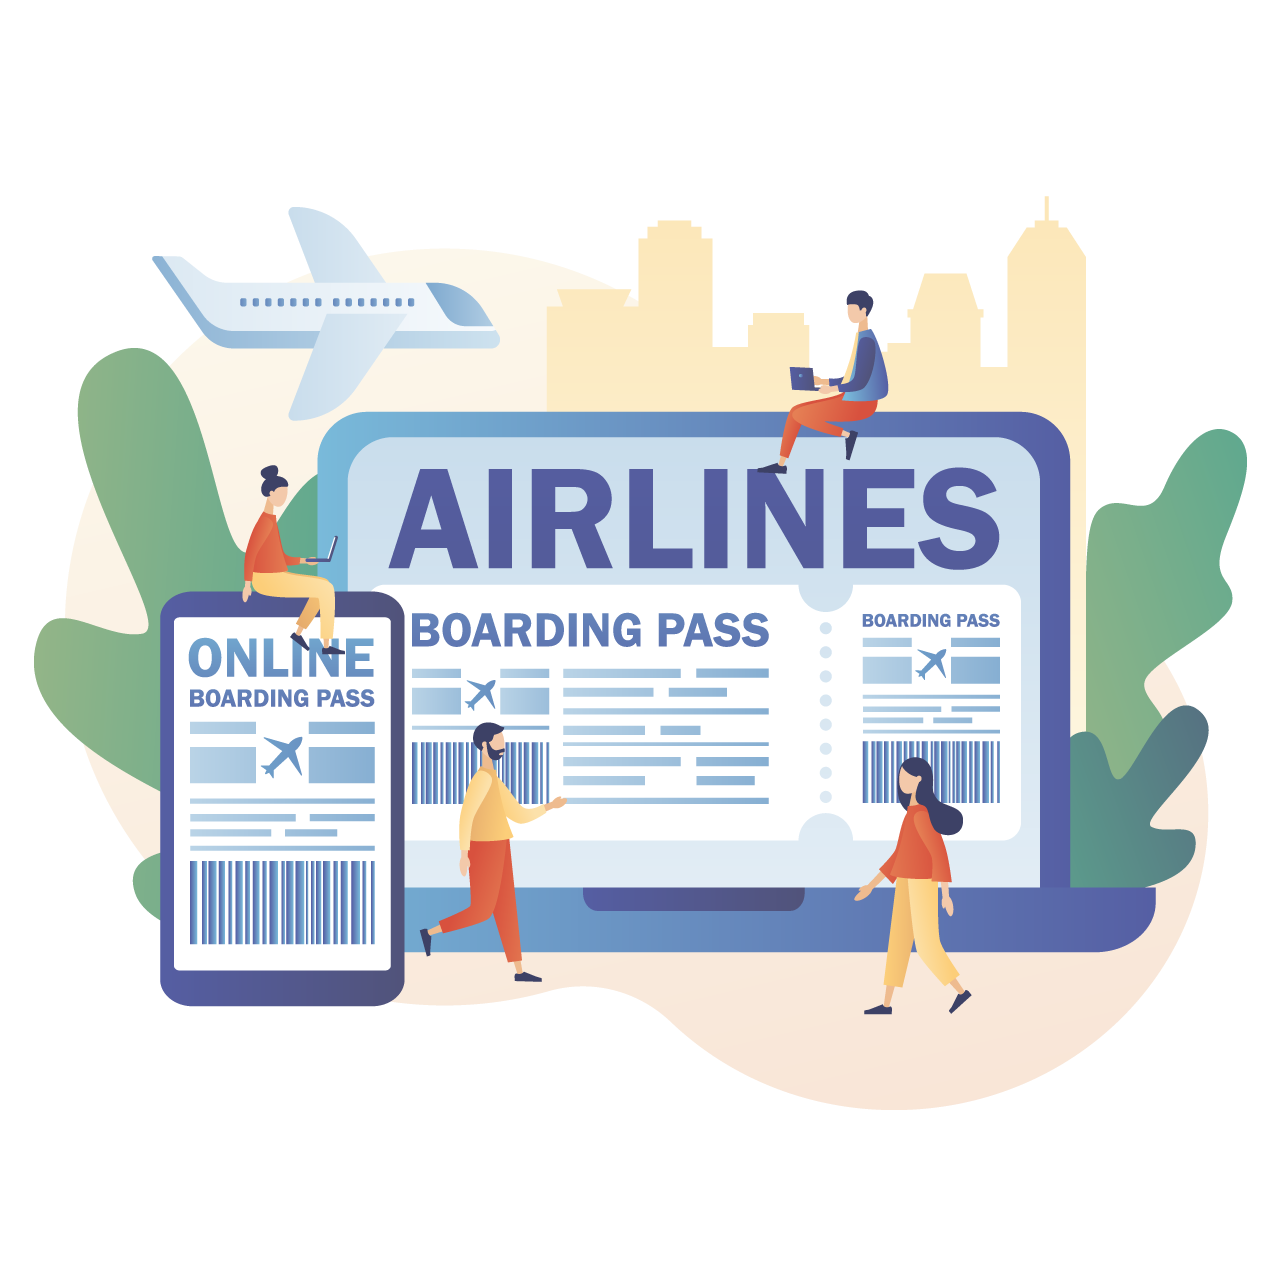 International airline airline boarding pass ticket smartphone app web site tiny people book